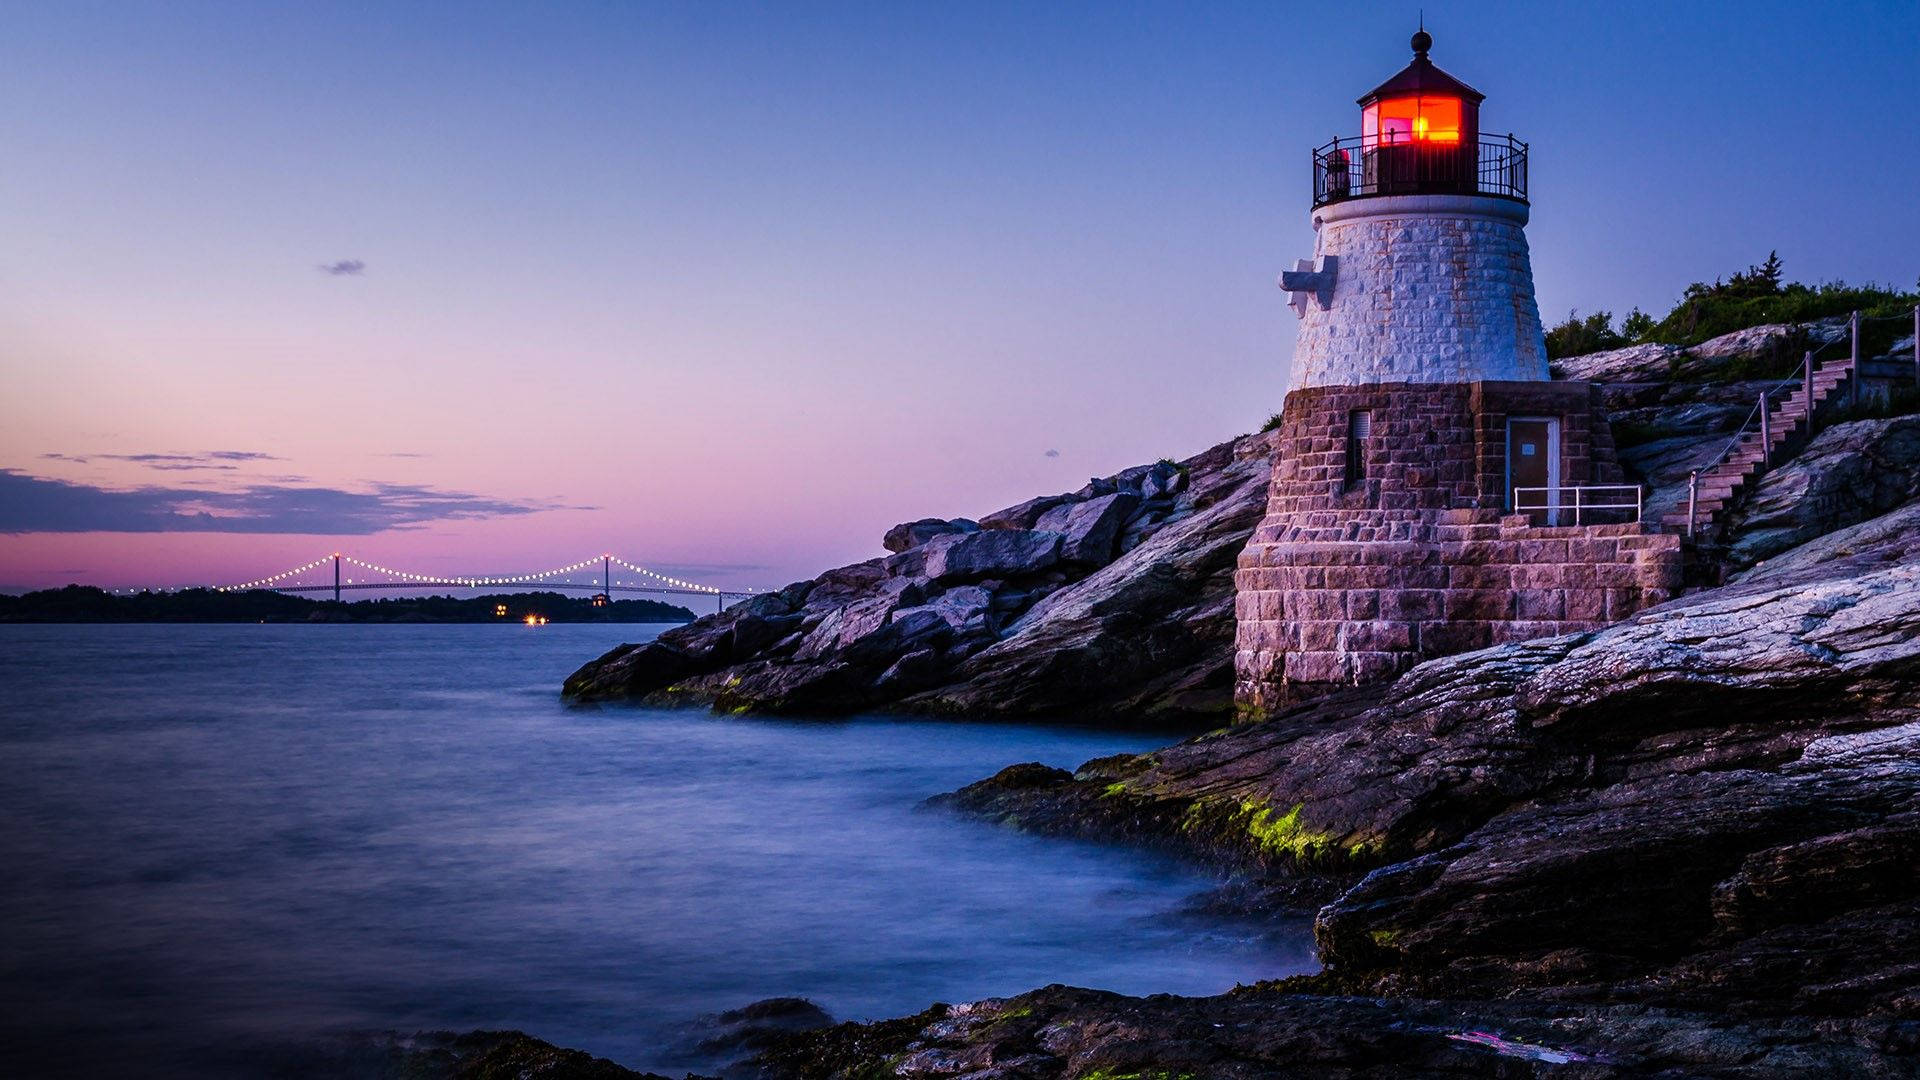 Download The Iconic Rhode Island's Lighthouse Wallpaper | Wallpapers.com